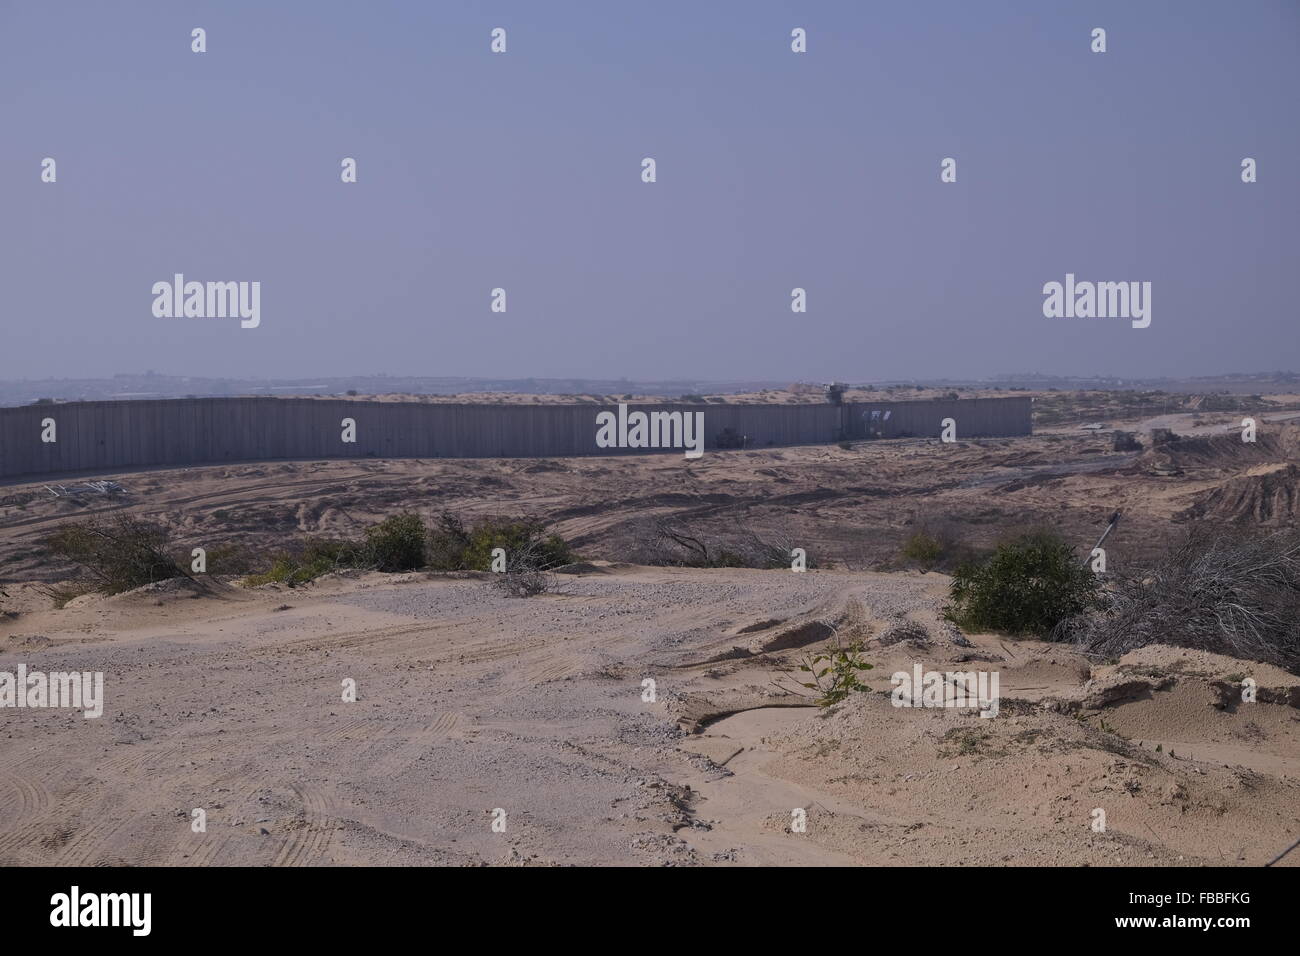 General view of the concrete wall separating Gaza Strip and Israel near the Israeli settlement of Netiv Haasara southern Israel Stock Photo